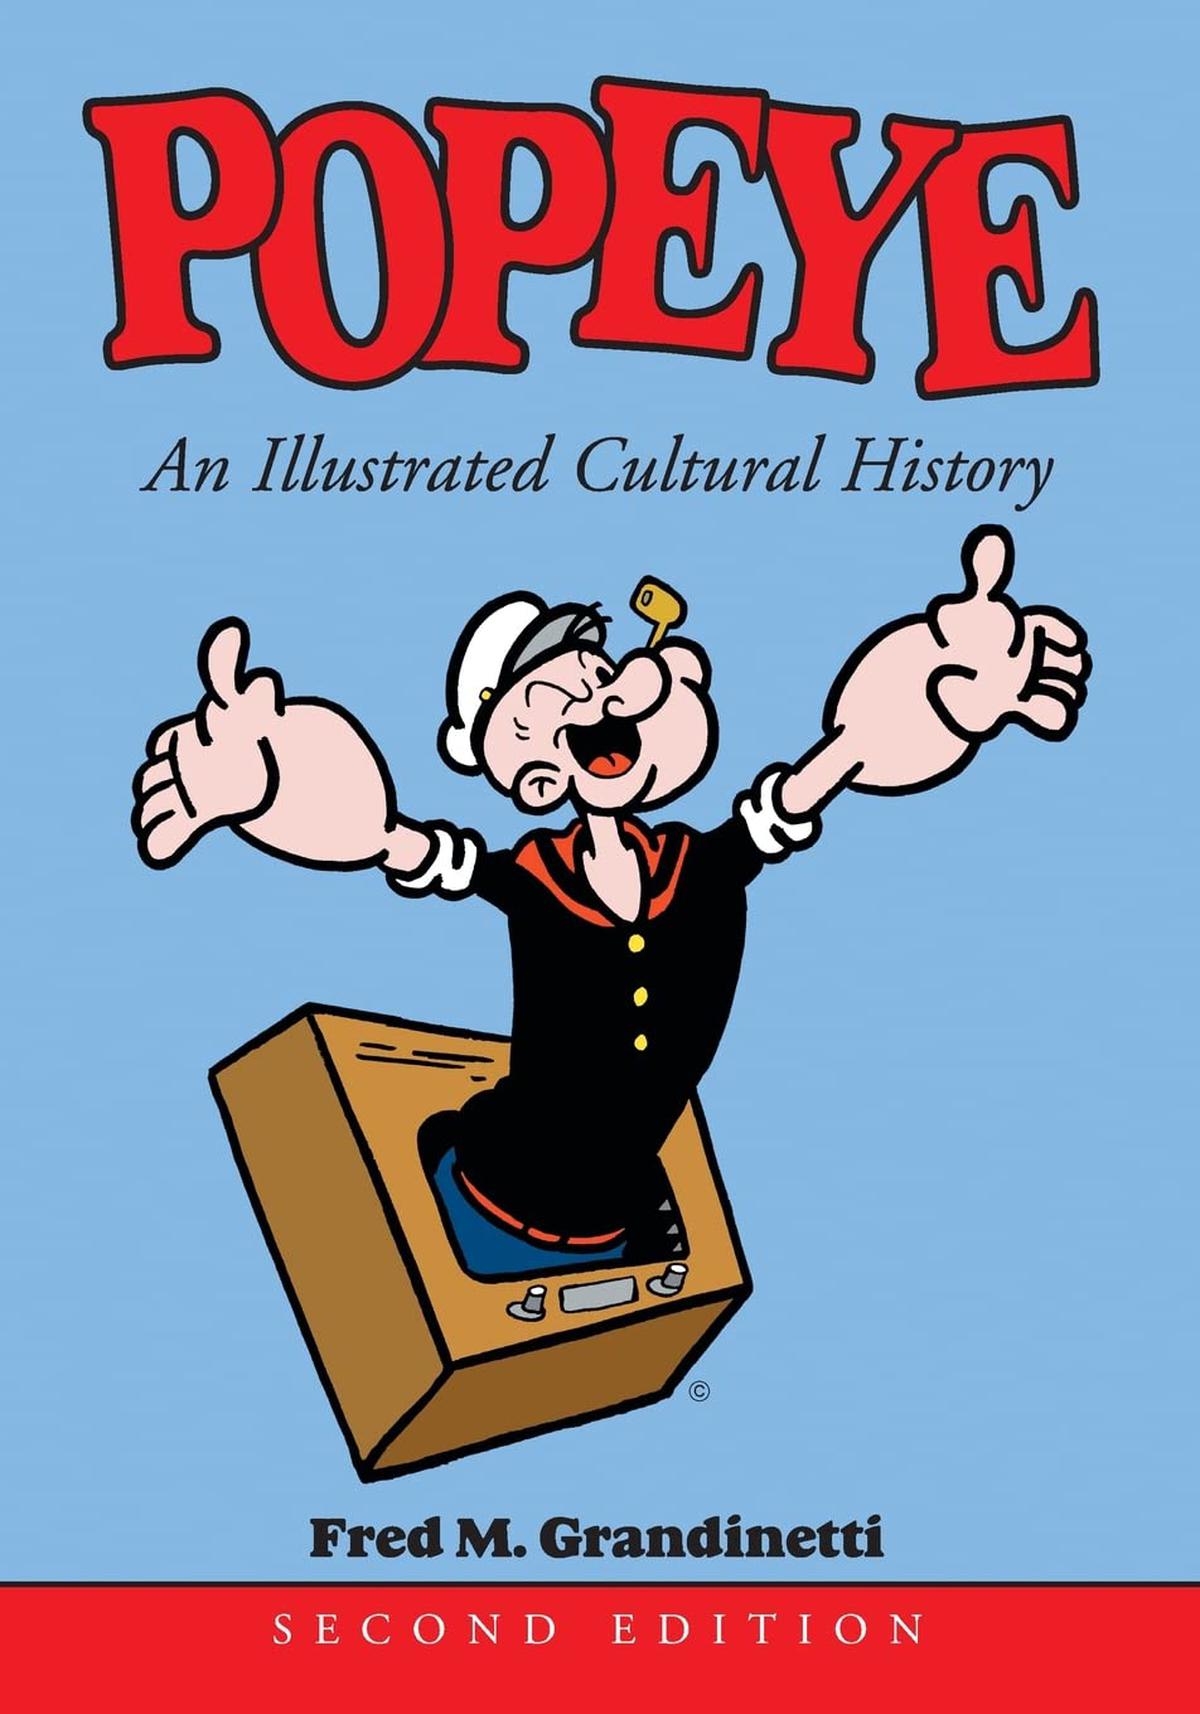 ‘Popeye: An Illustrated Cultural History’ by Fred M. Grandinetti